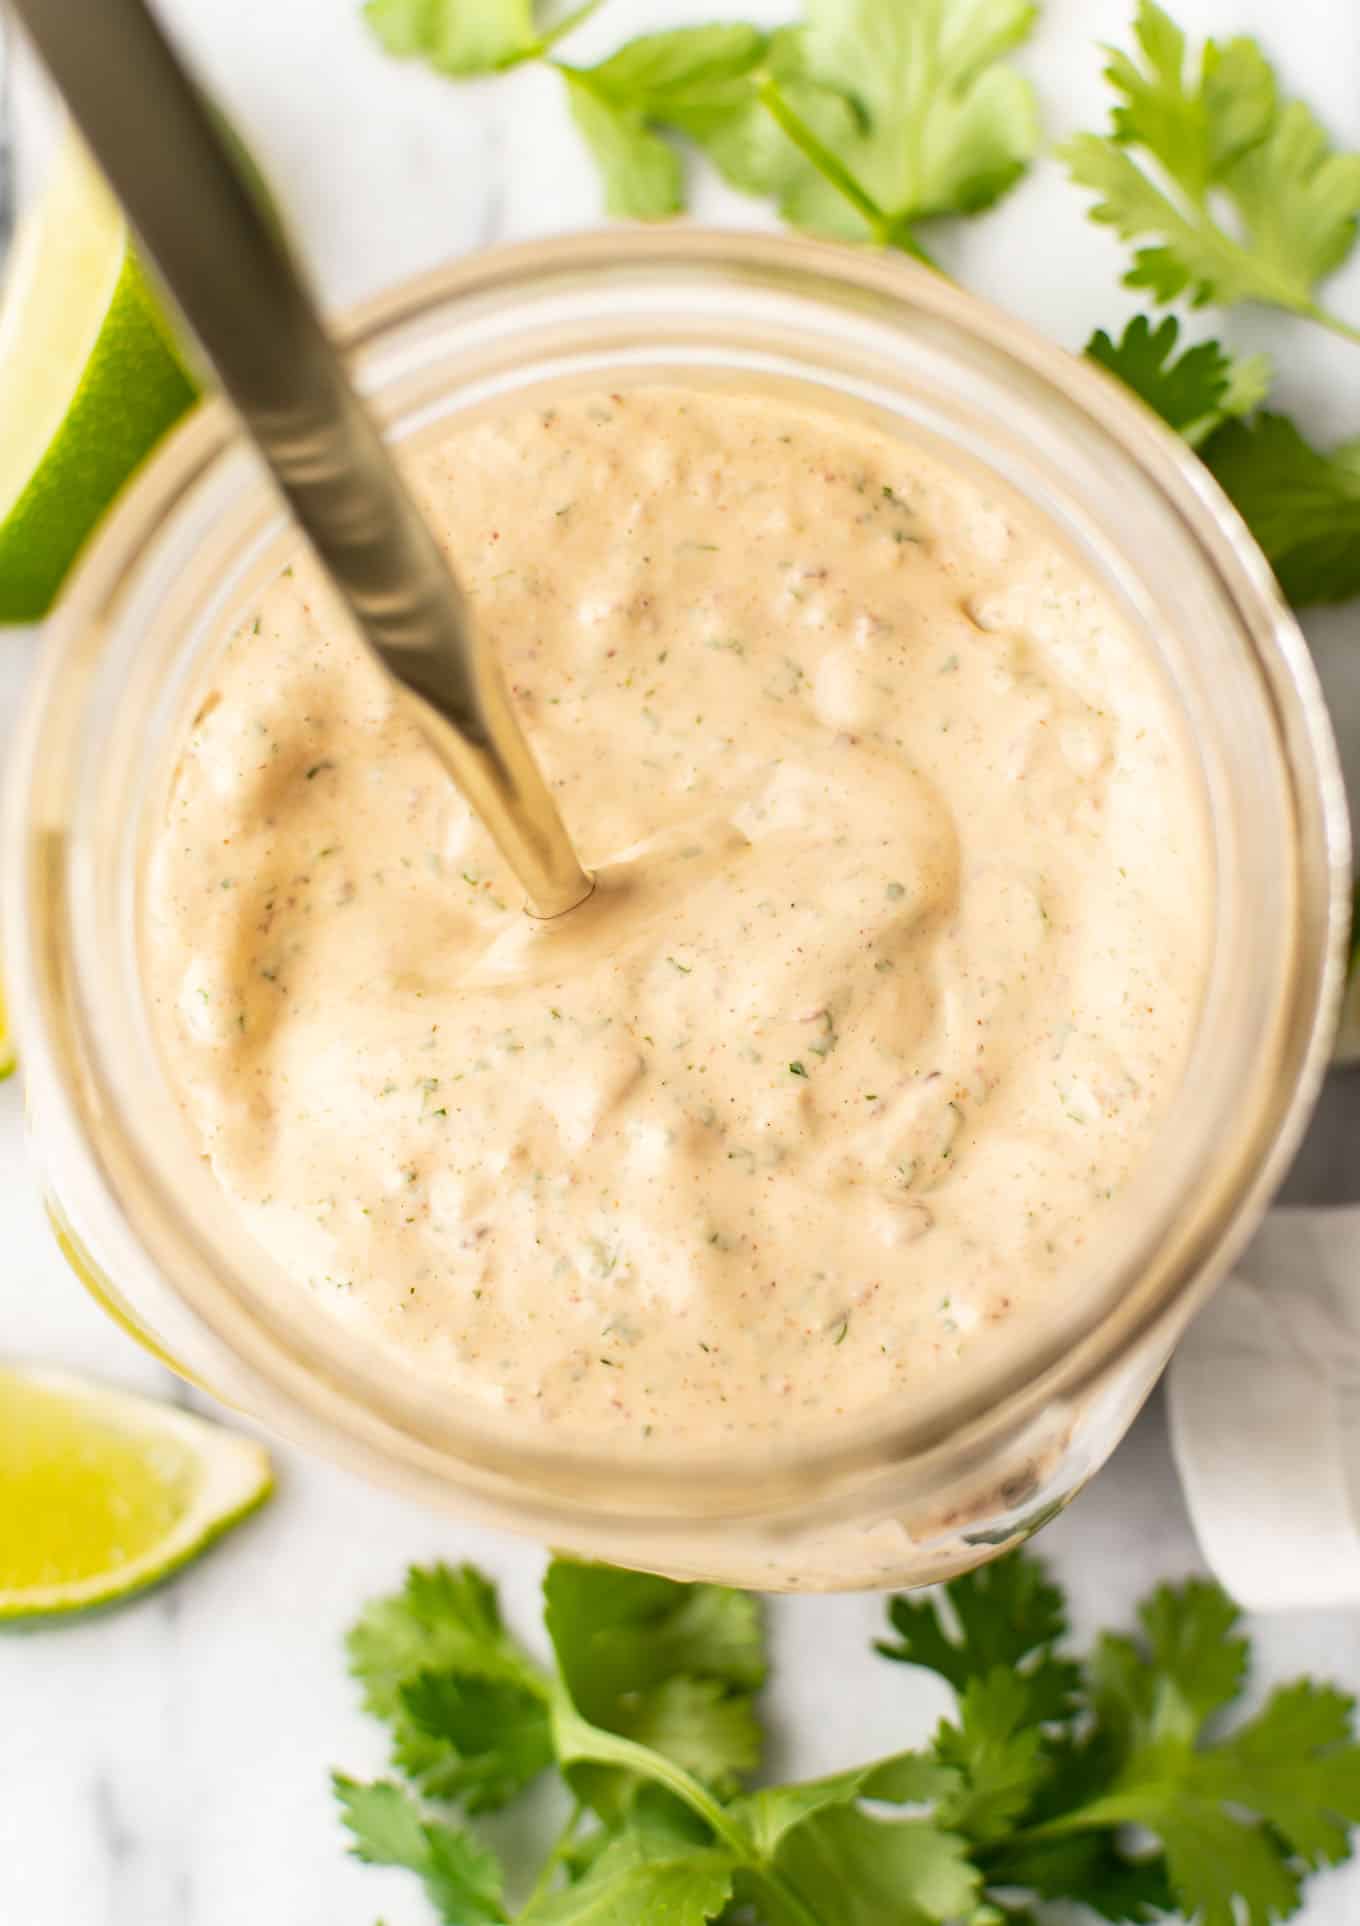 Homemade Spicy Ranch Dressing Recipe - Ready in 5 Minutes!